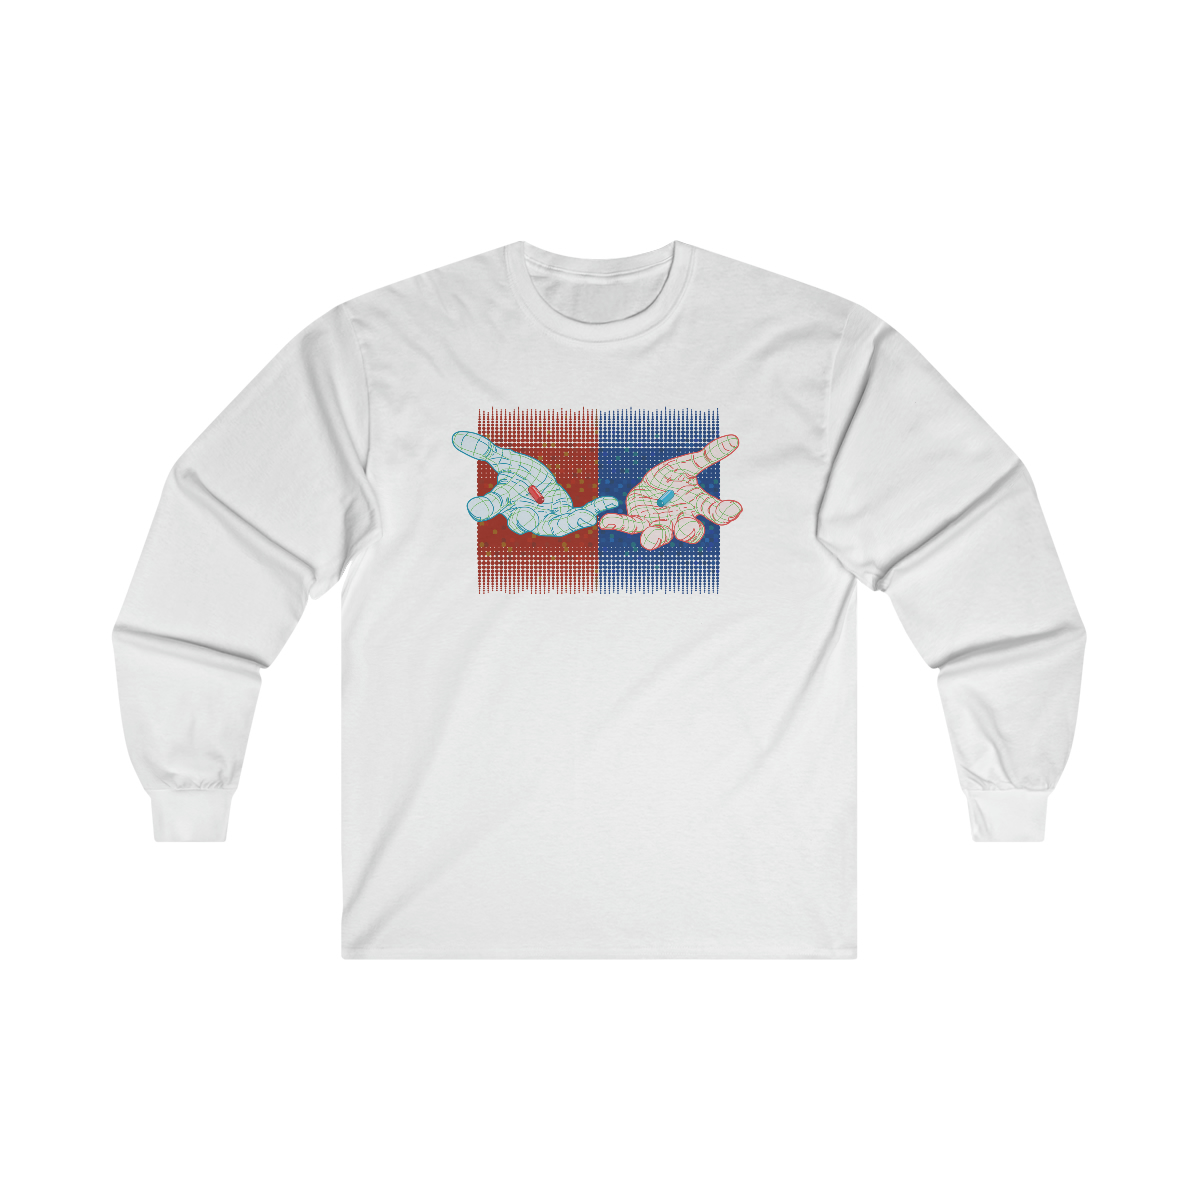 Two Hands (red & blue) - Unisex Ultra Cotton Long Sleeve Tee